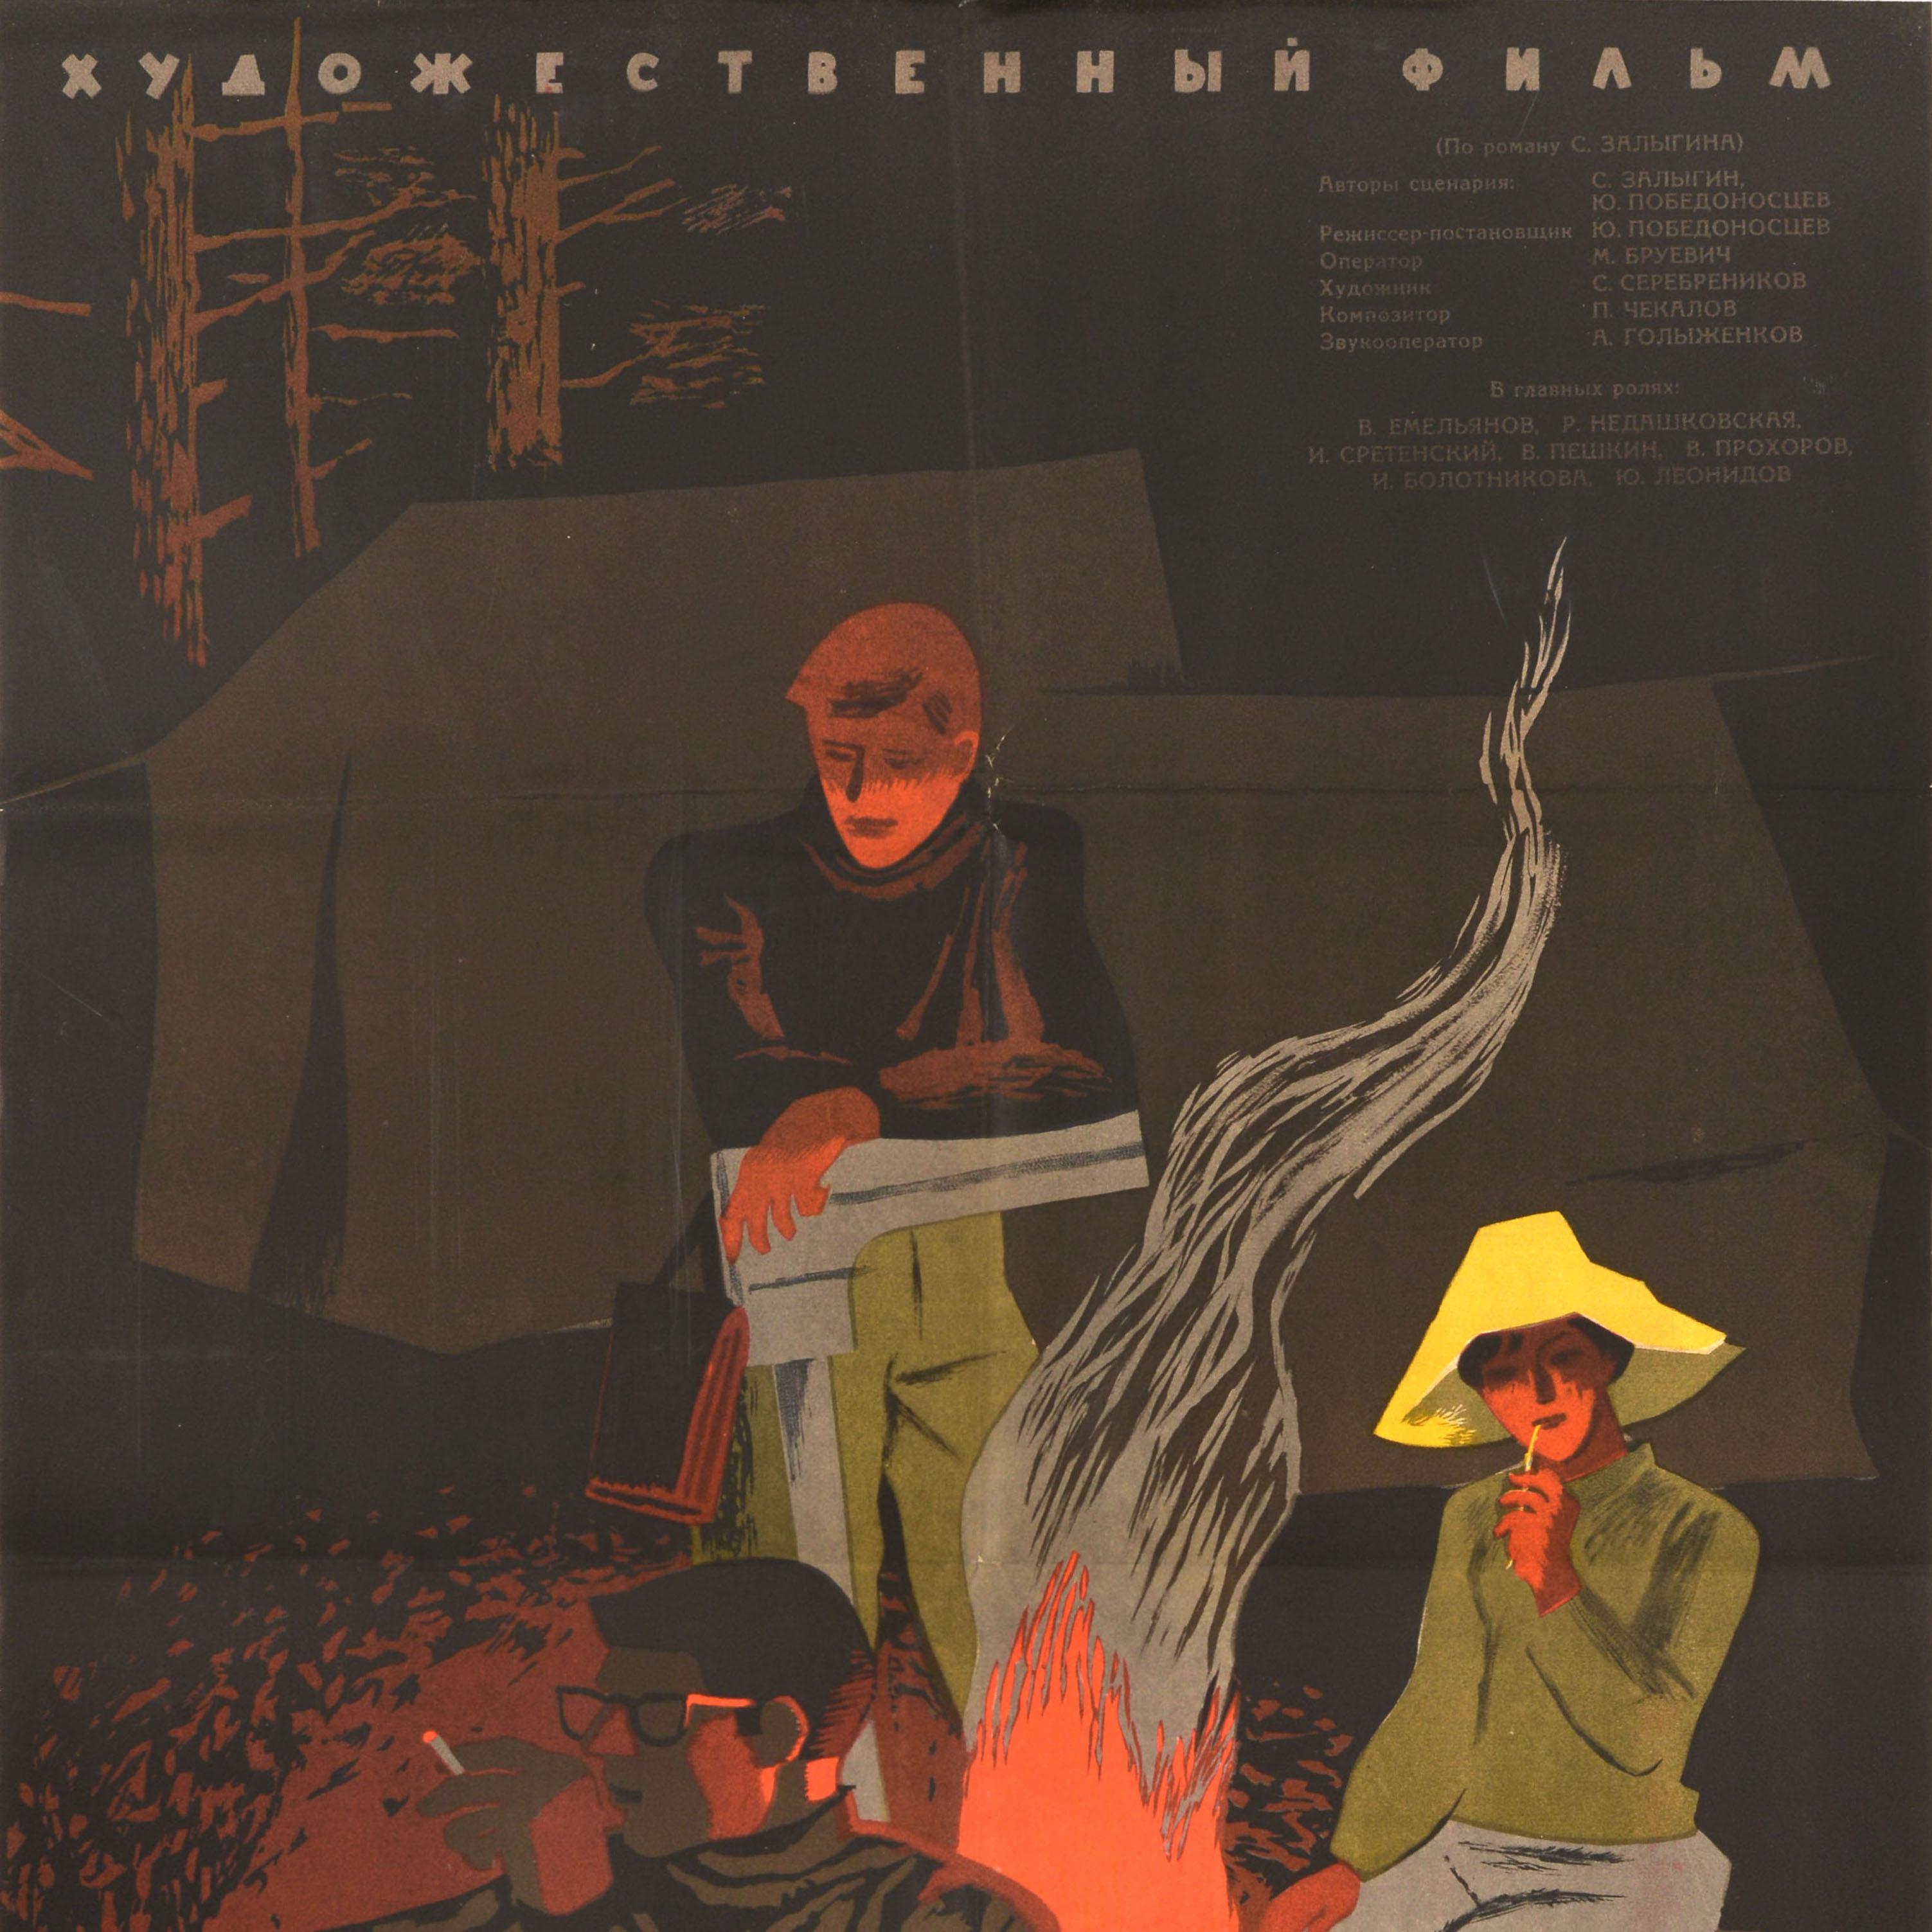 Russian Original Vintage Movie Poster Trails Of Altai Scientific Expedition Camping USSR For Sale